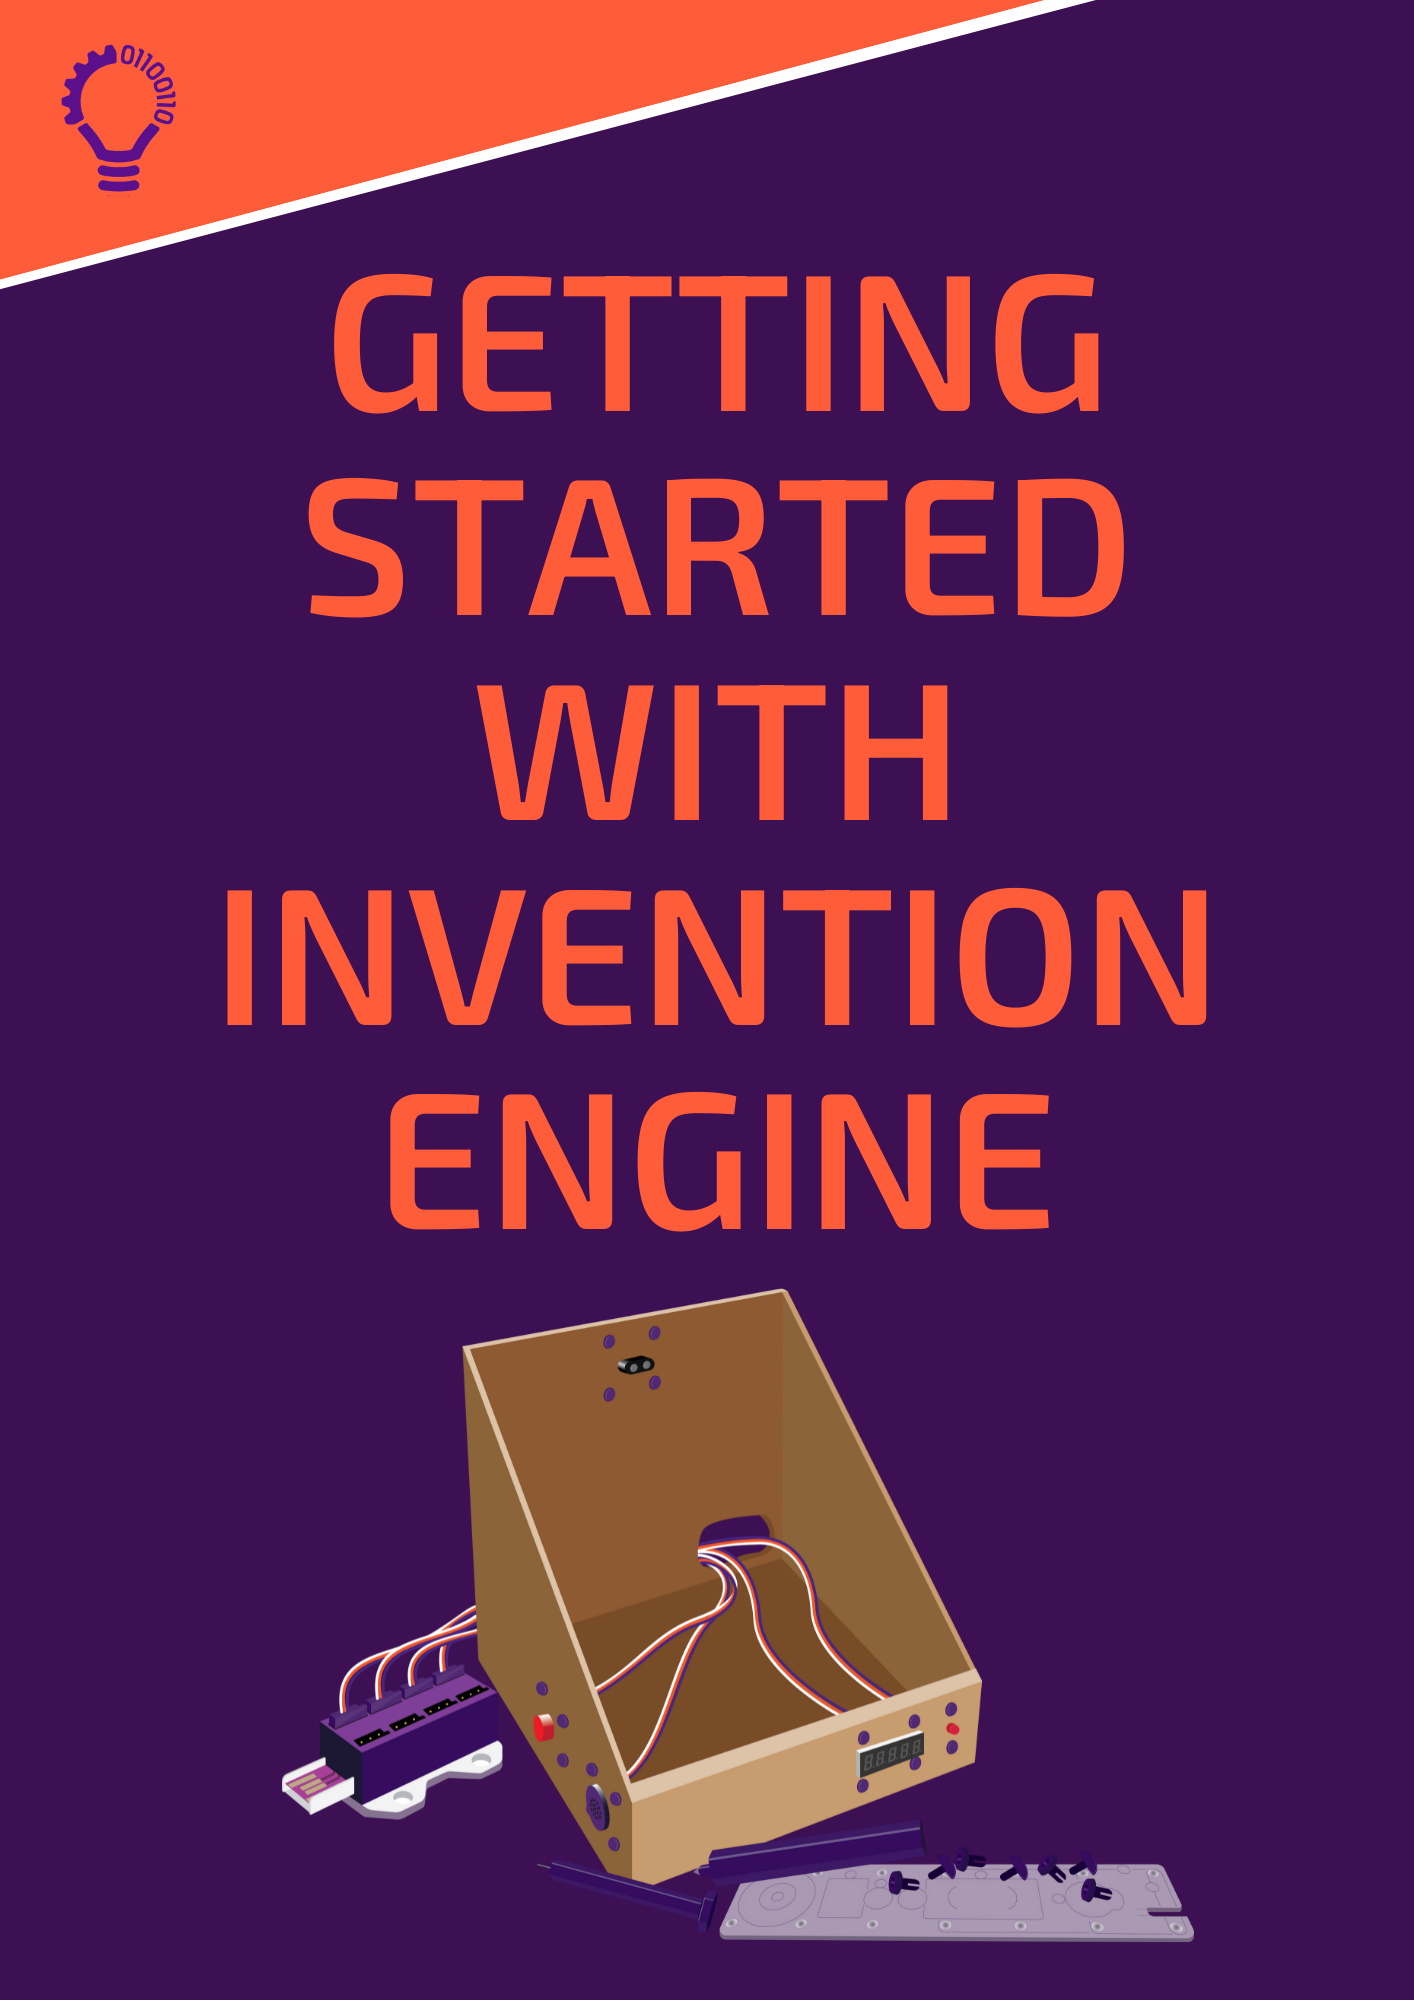 Invention Engine getting started guide image